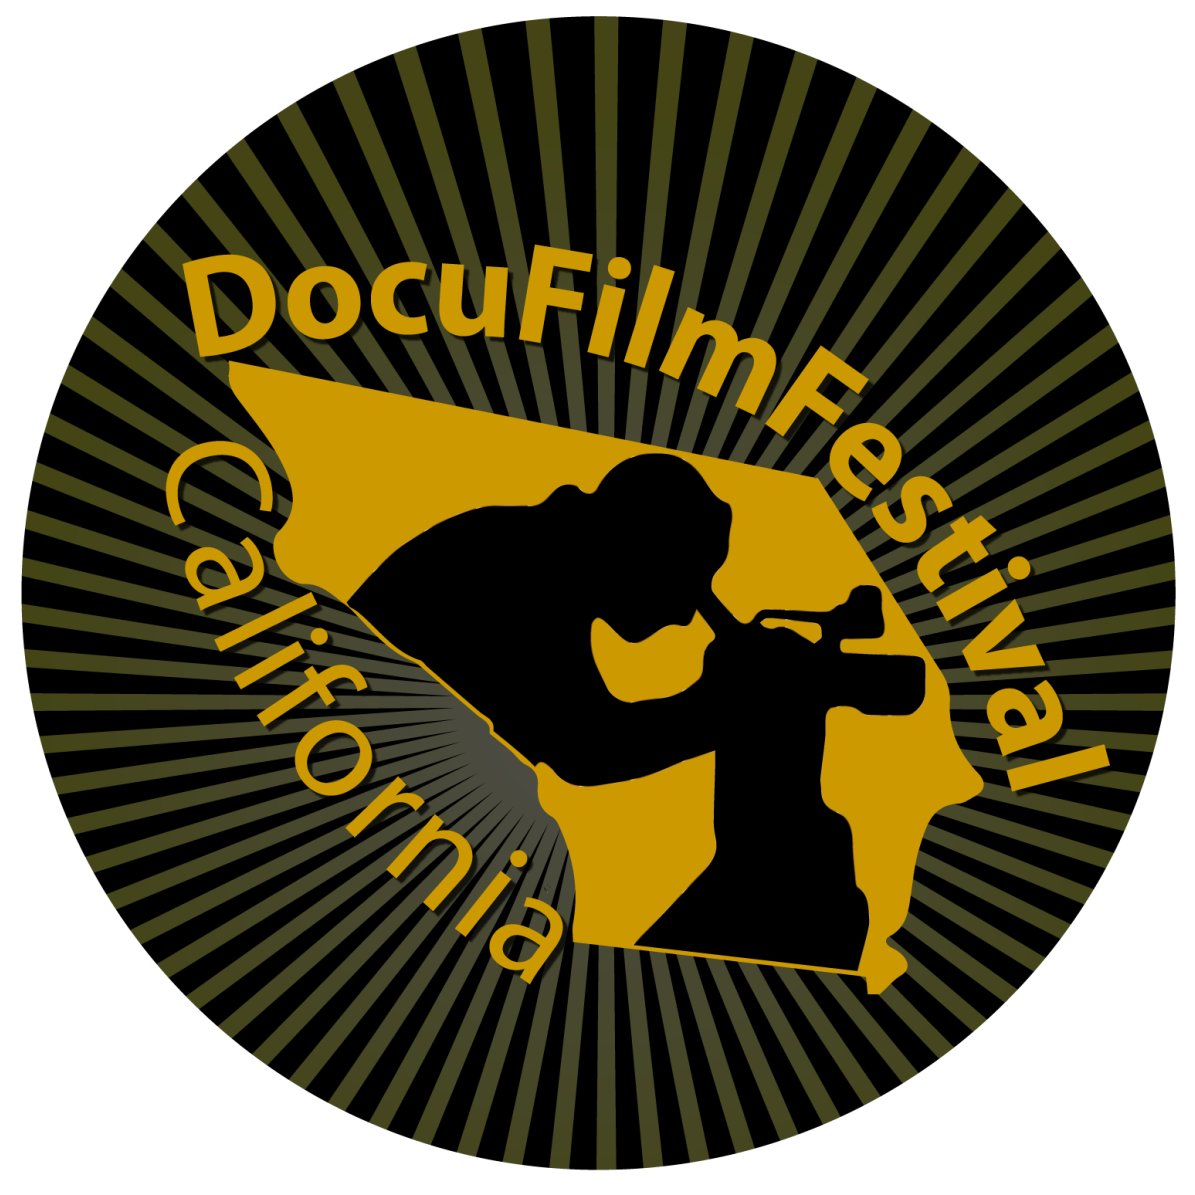 Honoring documentaries from across the globe December 5-11 (special VIP events December 8-12)